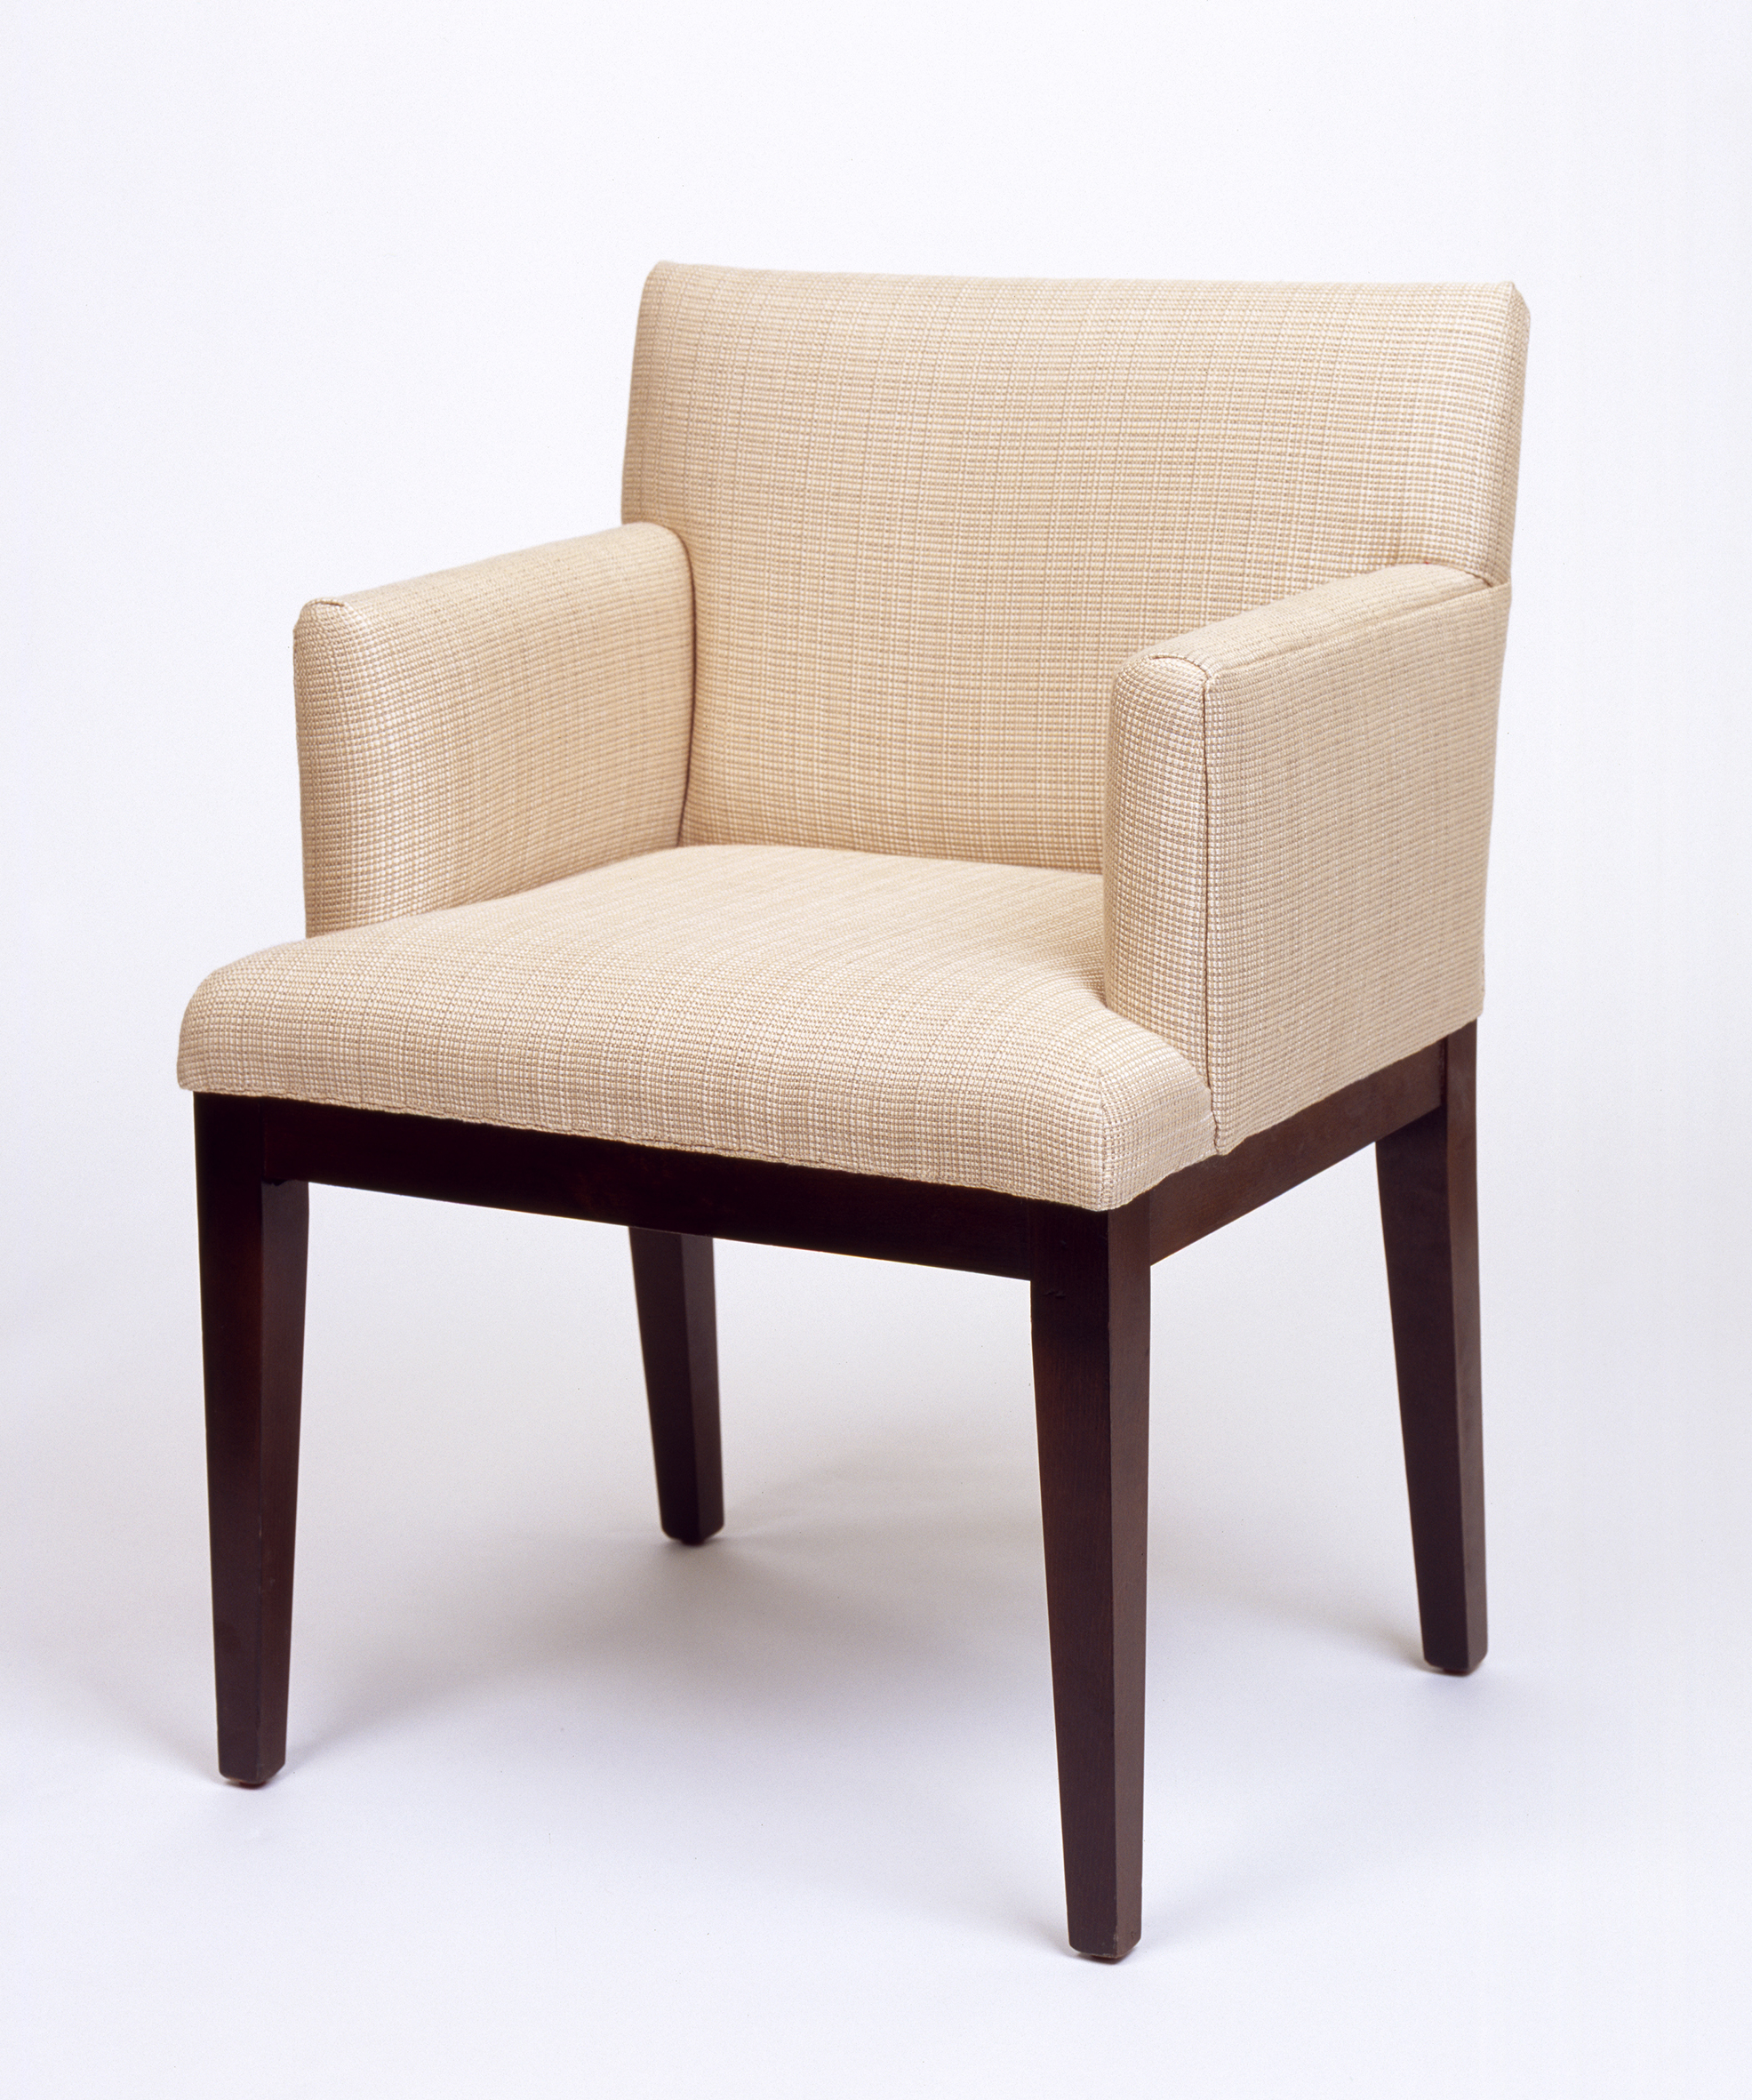  dining chairs with arms uk